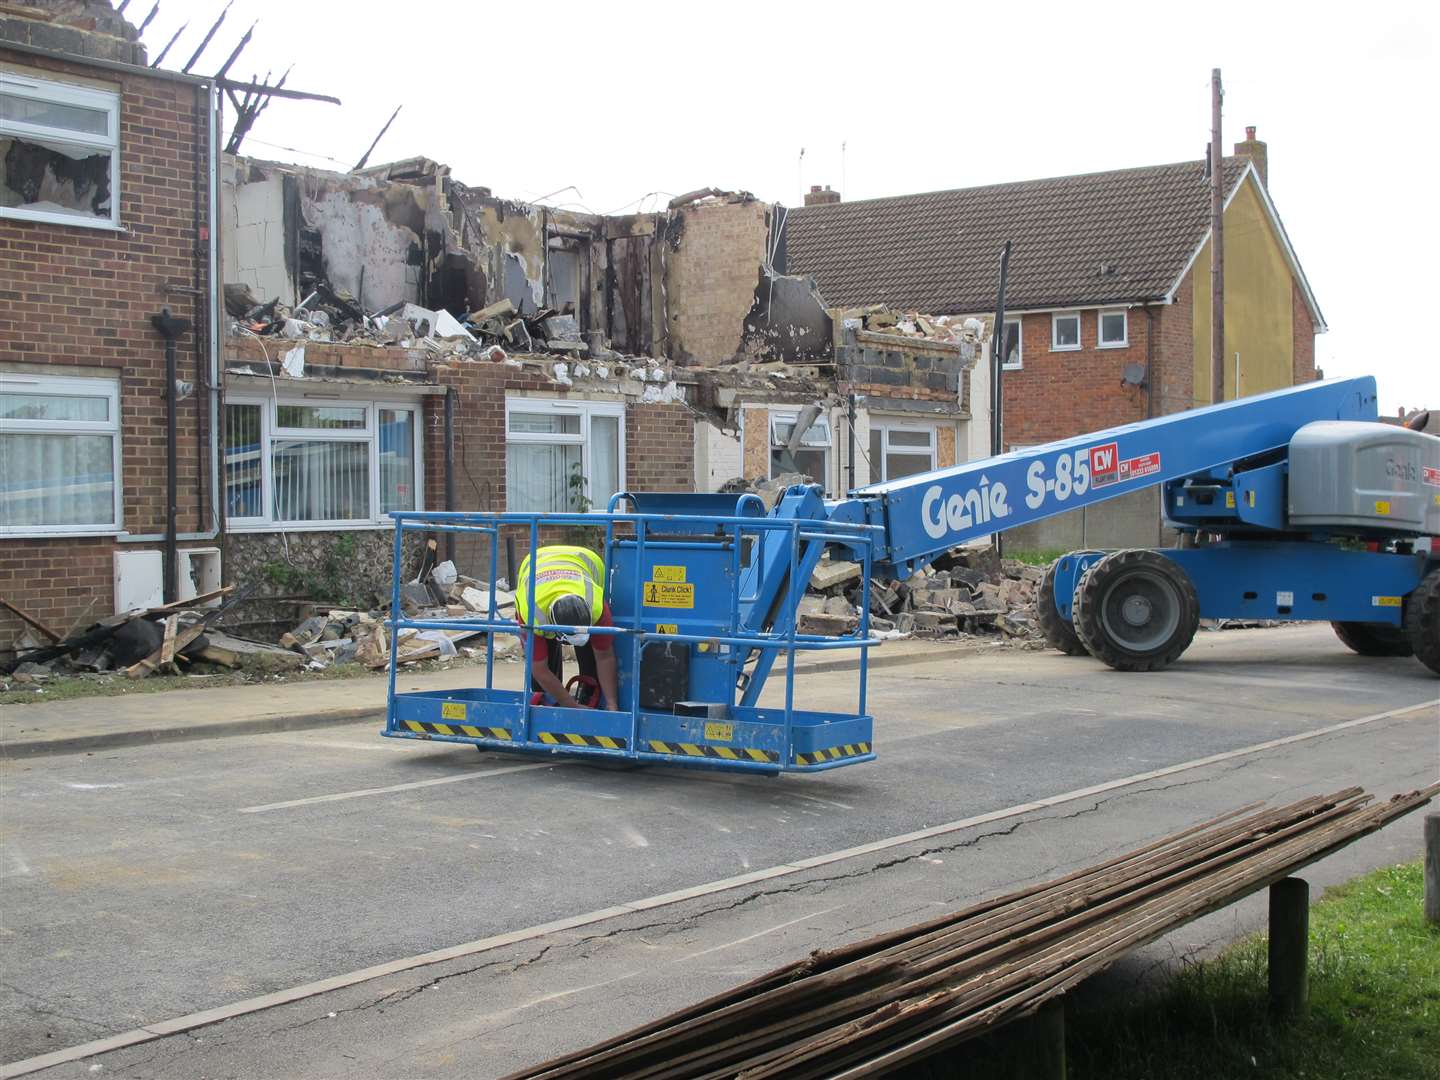 Heavy equipment has been drafted in to remove parts of the unsafe structure in Little Knoll, South Ashford